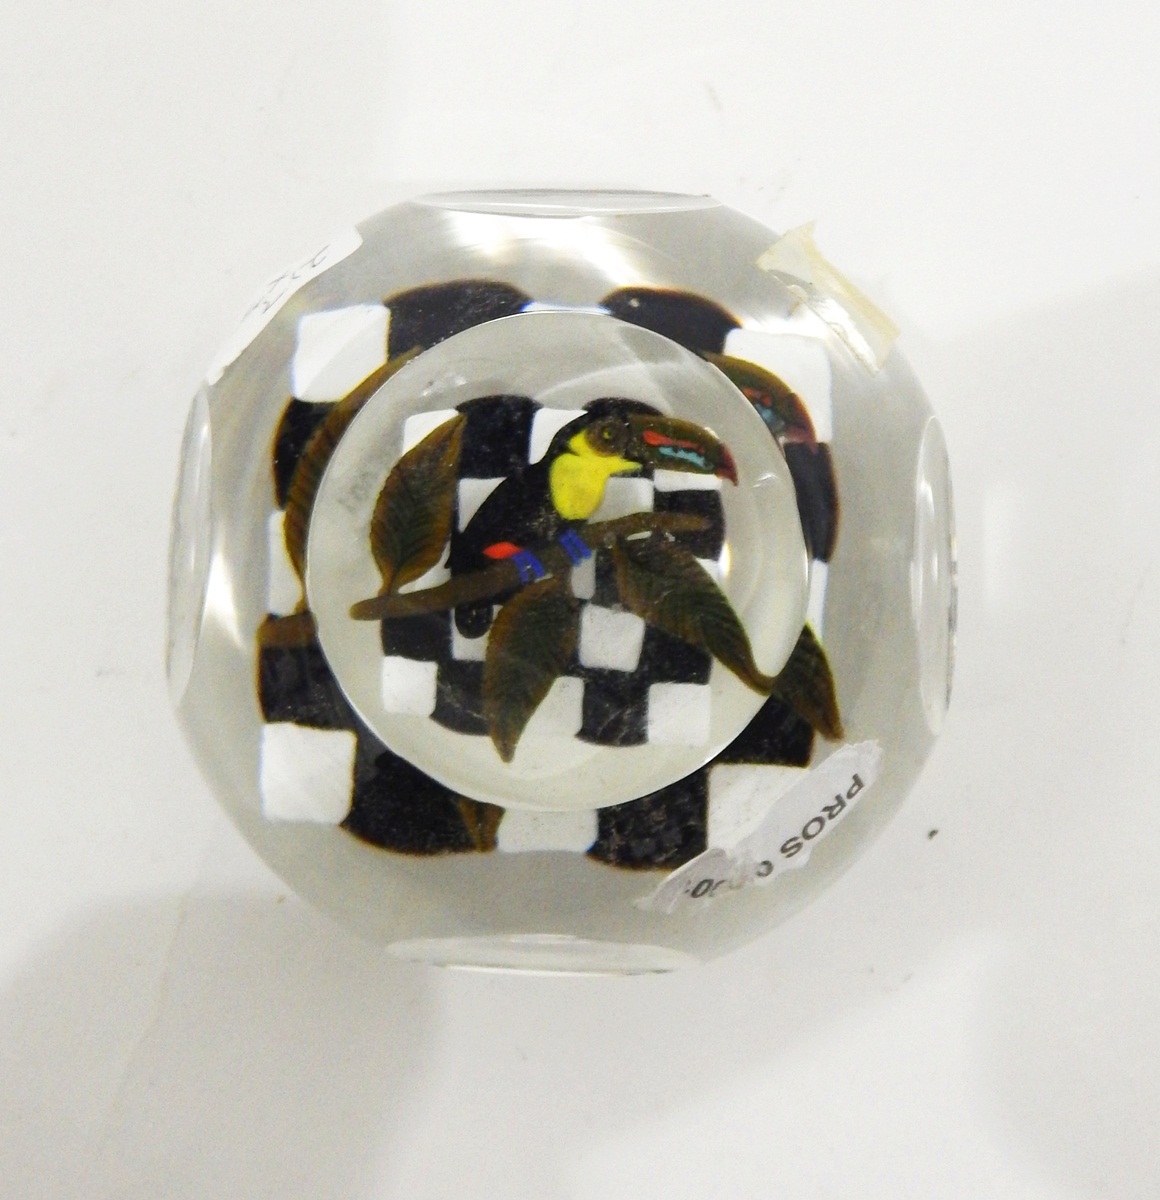 Matched pair of glass paperweights by John Deacons of circular form with faceted viewing panels, - Image 2 of 3